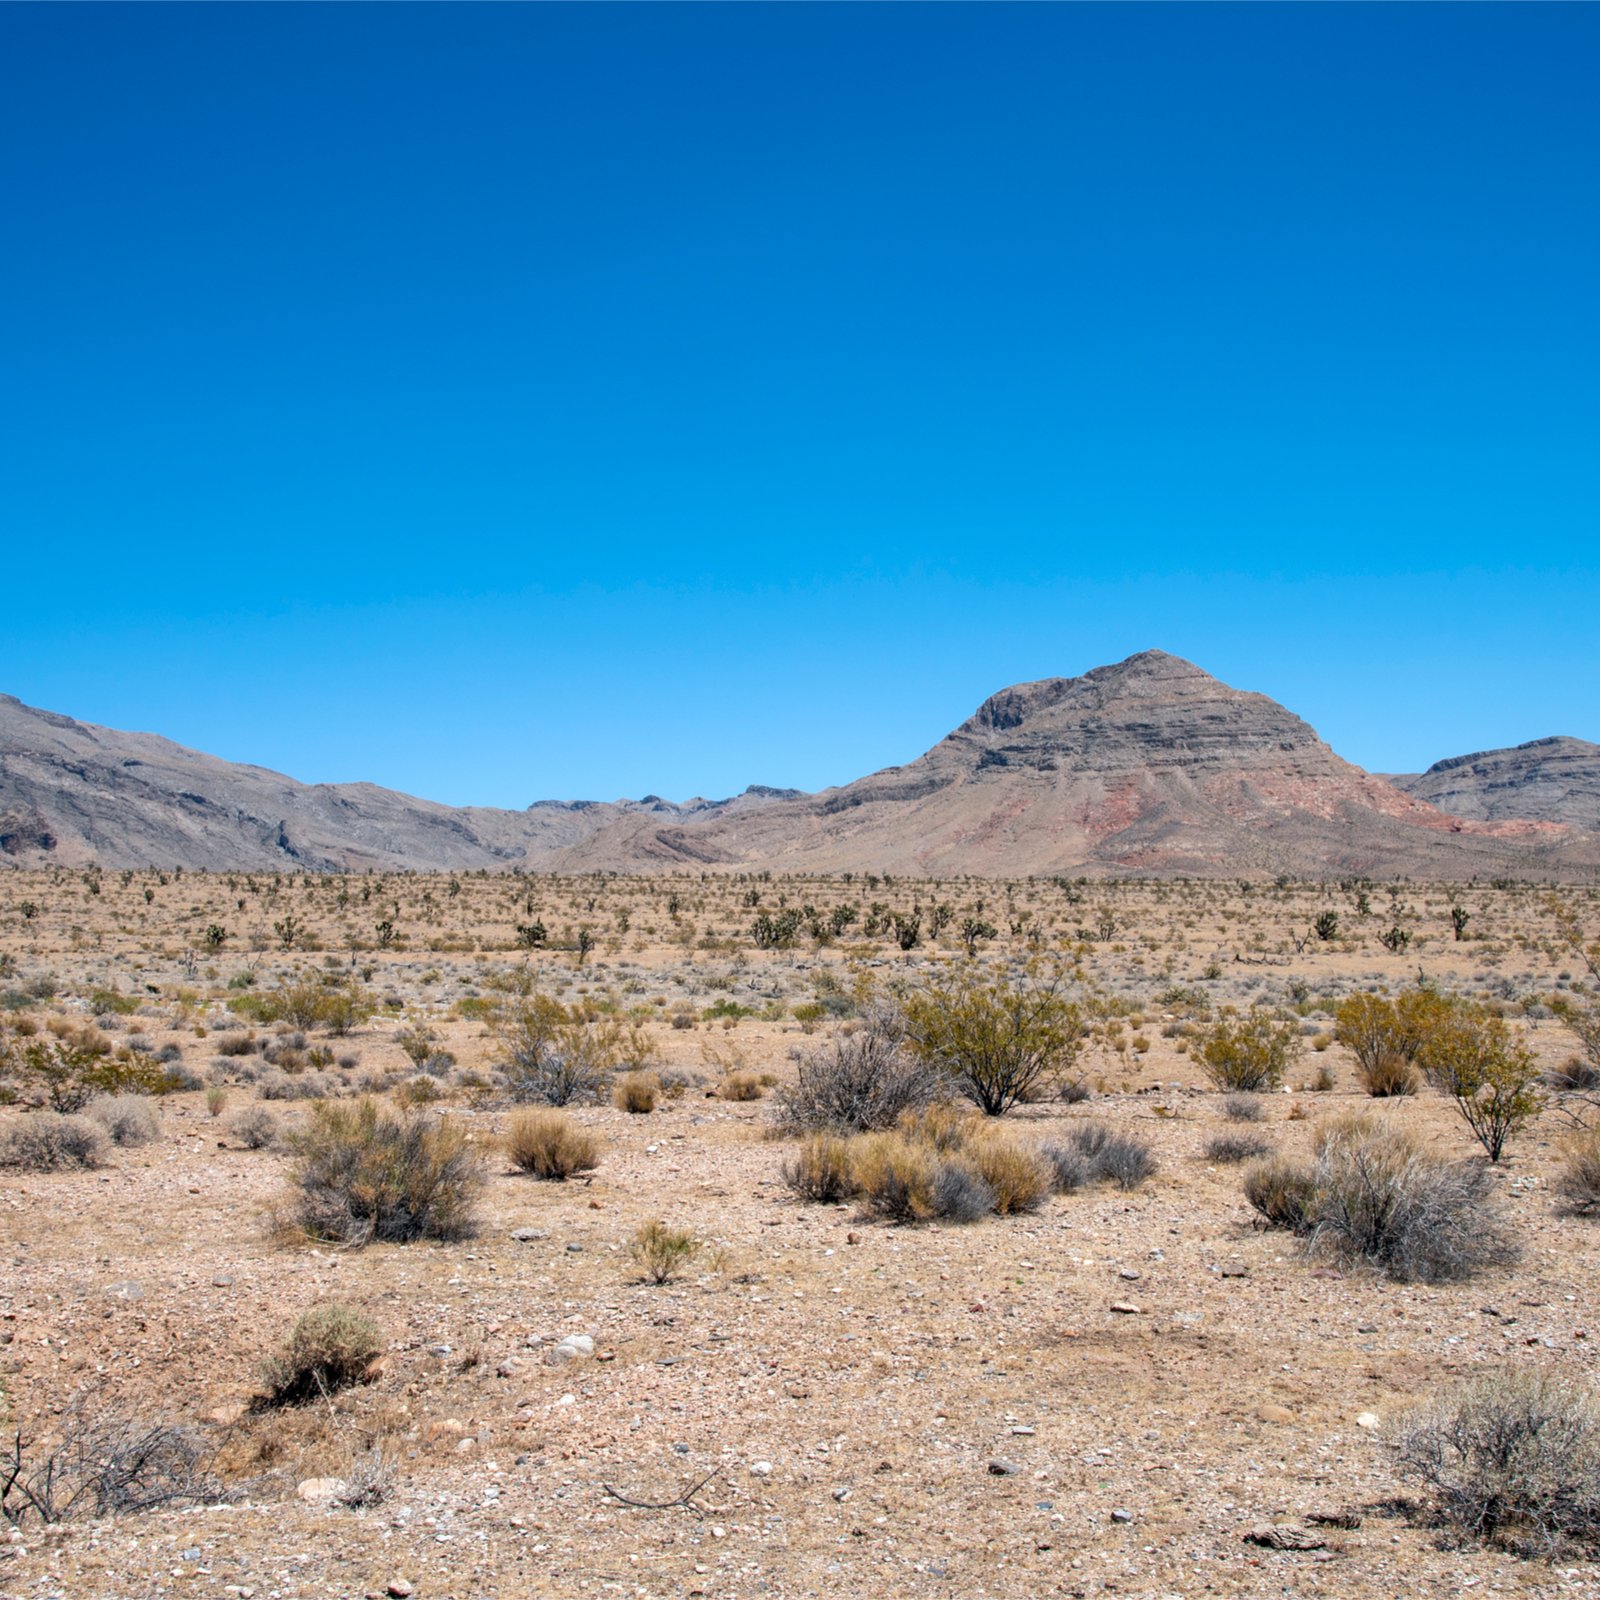 Lawyer Invests $300 Million to Build Crypto City in the Nevada Desert